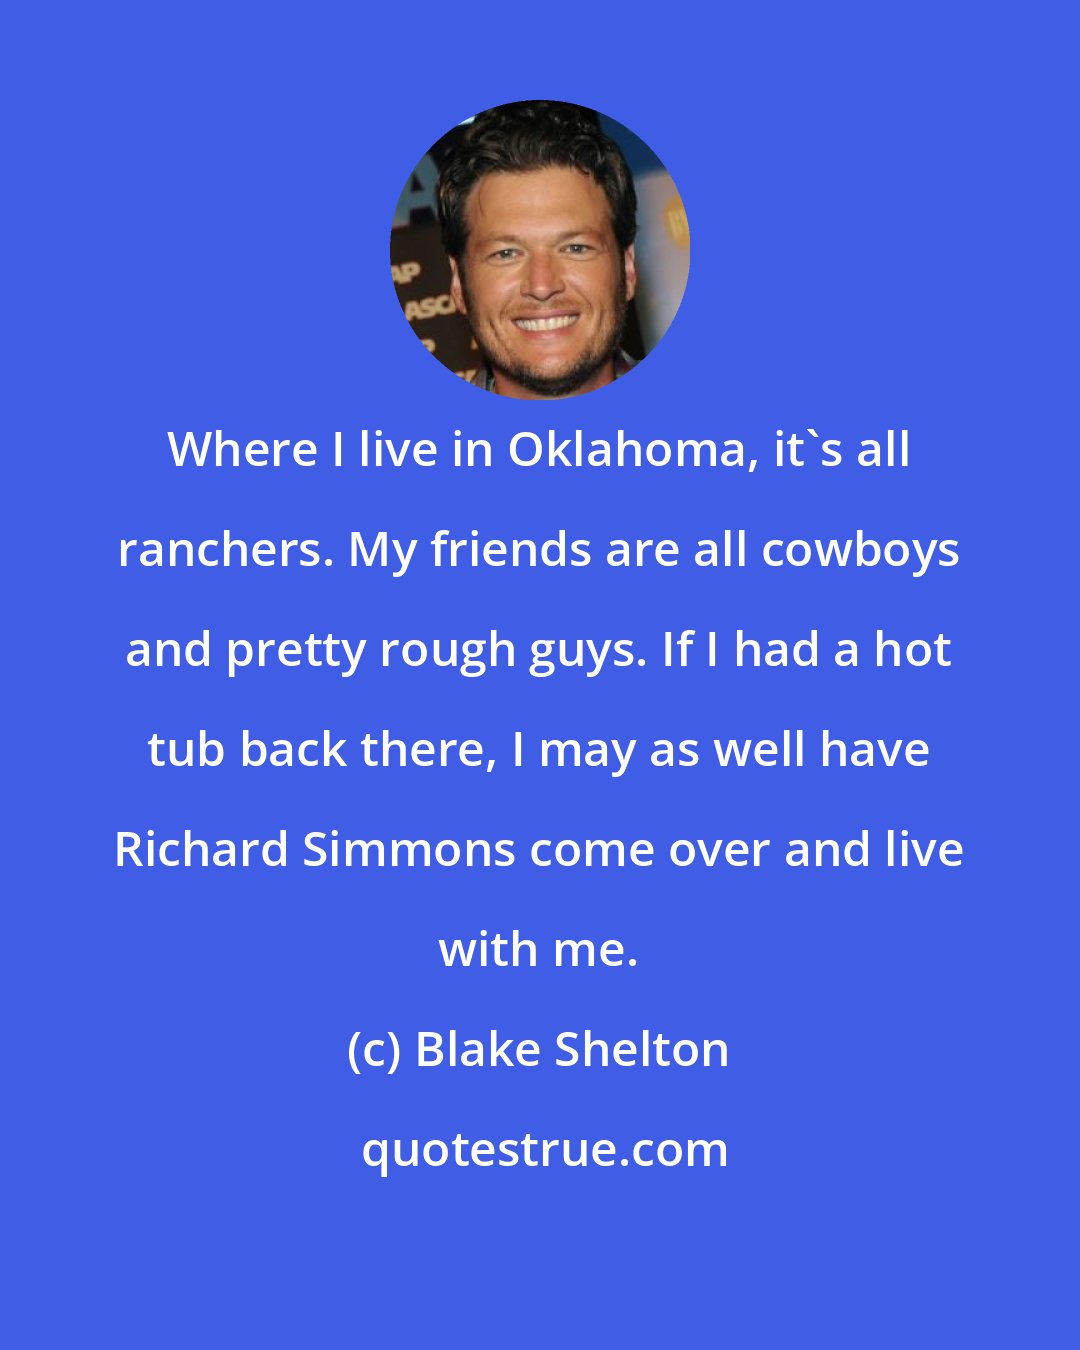 Blake Shelton: Where I live in Oklahoma, it's all ranchers. My friends are all cowboys and pretty rough guys. If I had a hot tub back there, I may as well have Richard Simmons come over and live with me.